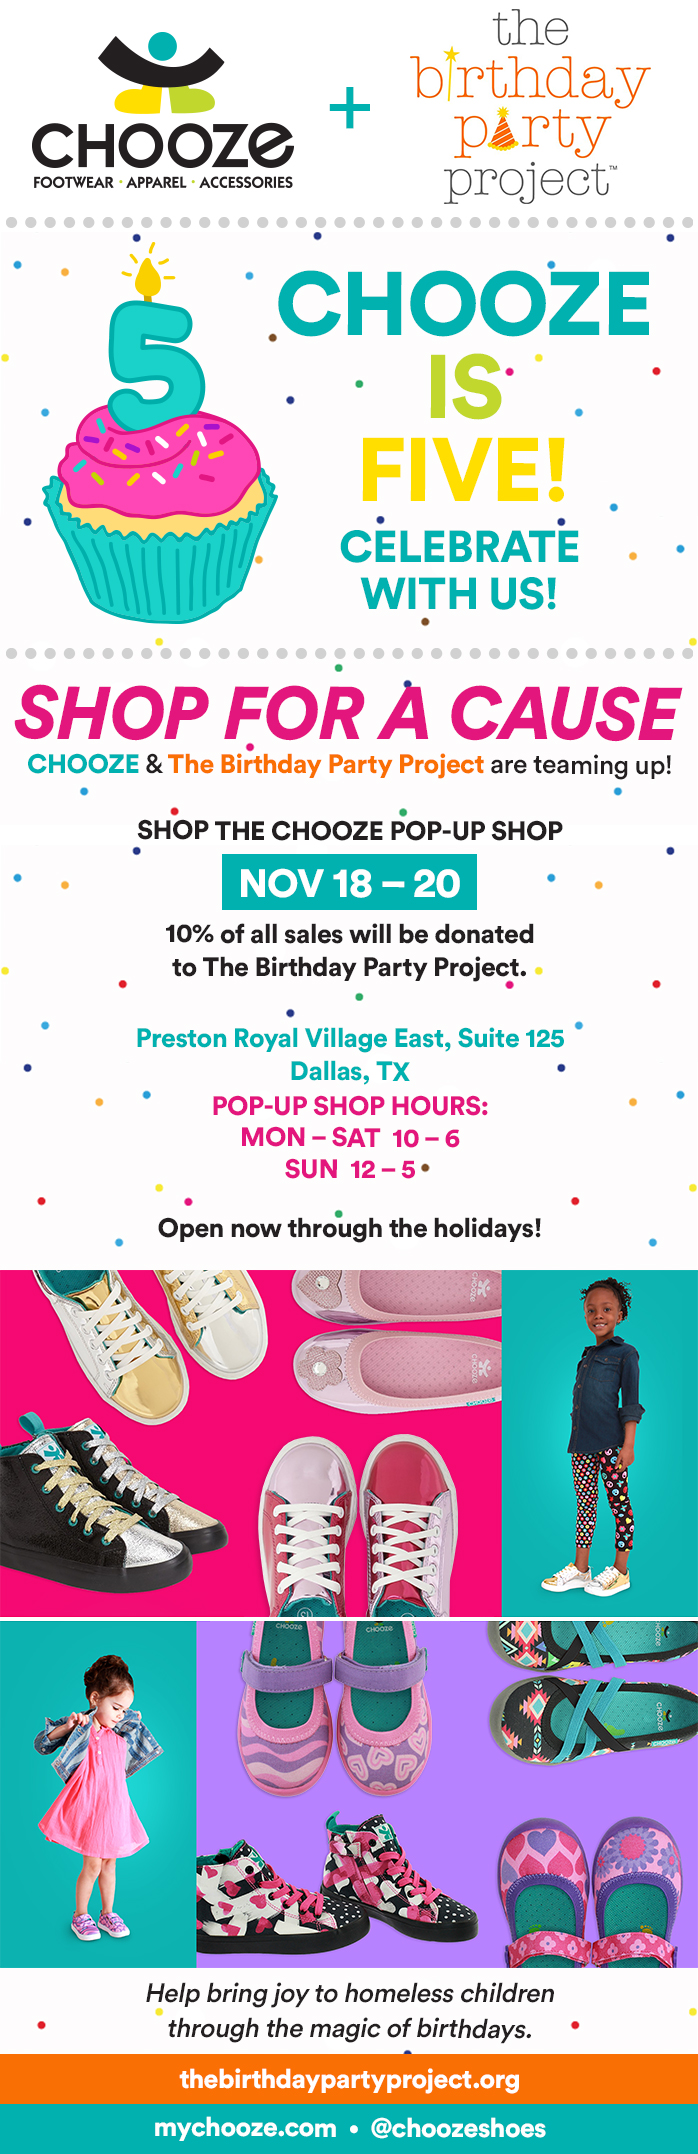 Chooze Birthday Party Project